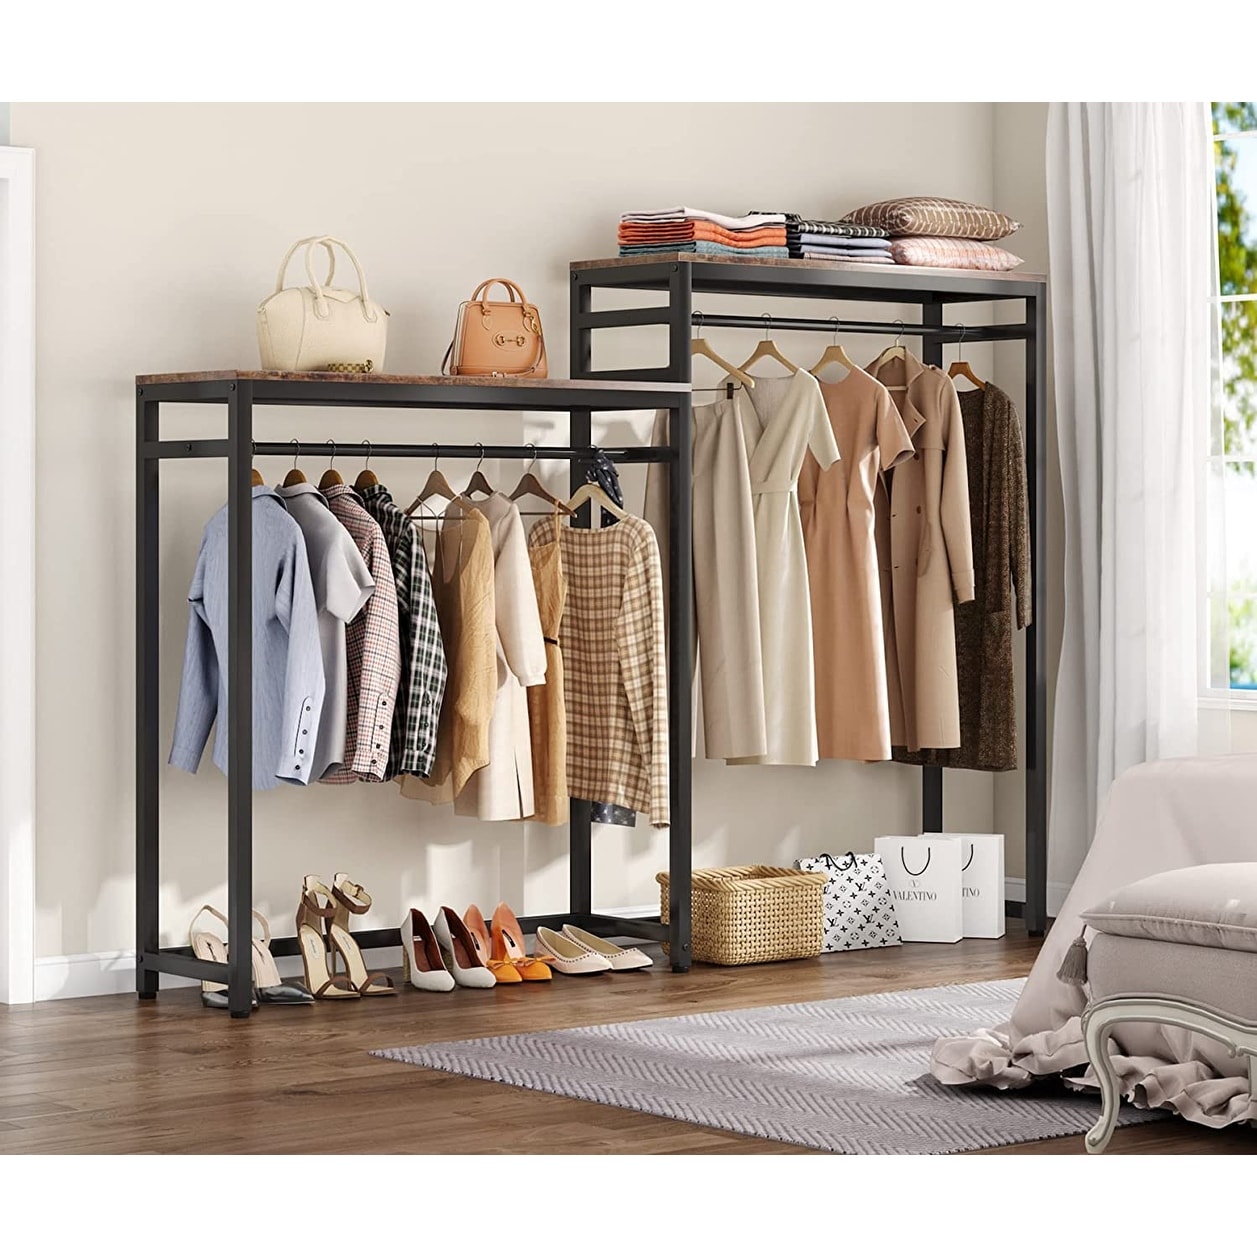 https://ak1.ostkcdn.com/images/products/is/images/direct/16216b549f7cd055c5bc3810f57aa31010e85590/Heavy-Duty-Metal-Clothes-Garment-Racks-with-Storage-Shelves-and-Double-Hanging-Rod%2CFree-Standing-Closet-Organizer.jpg